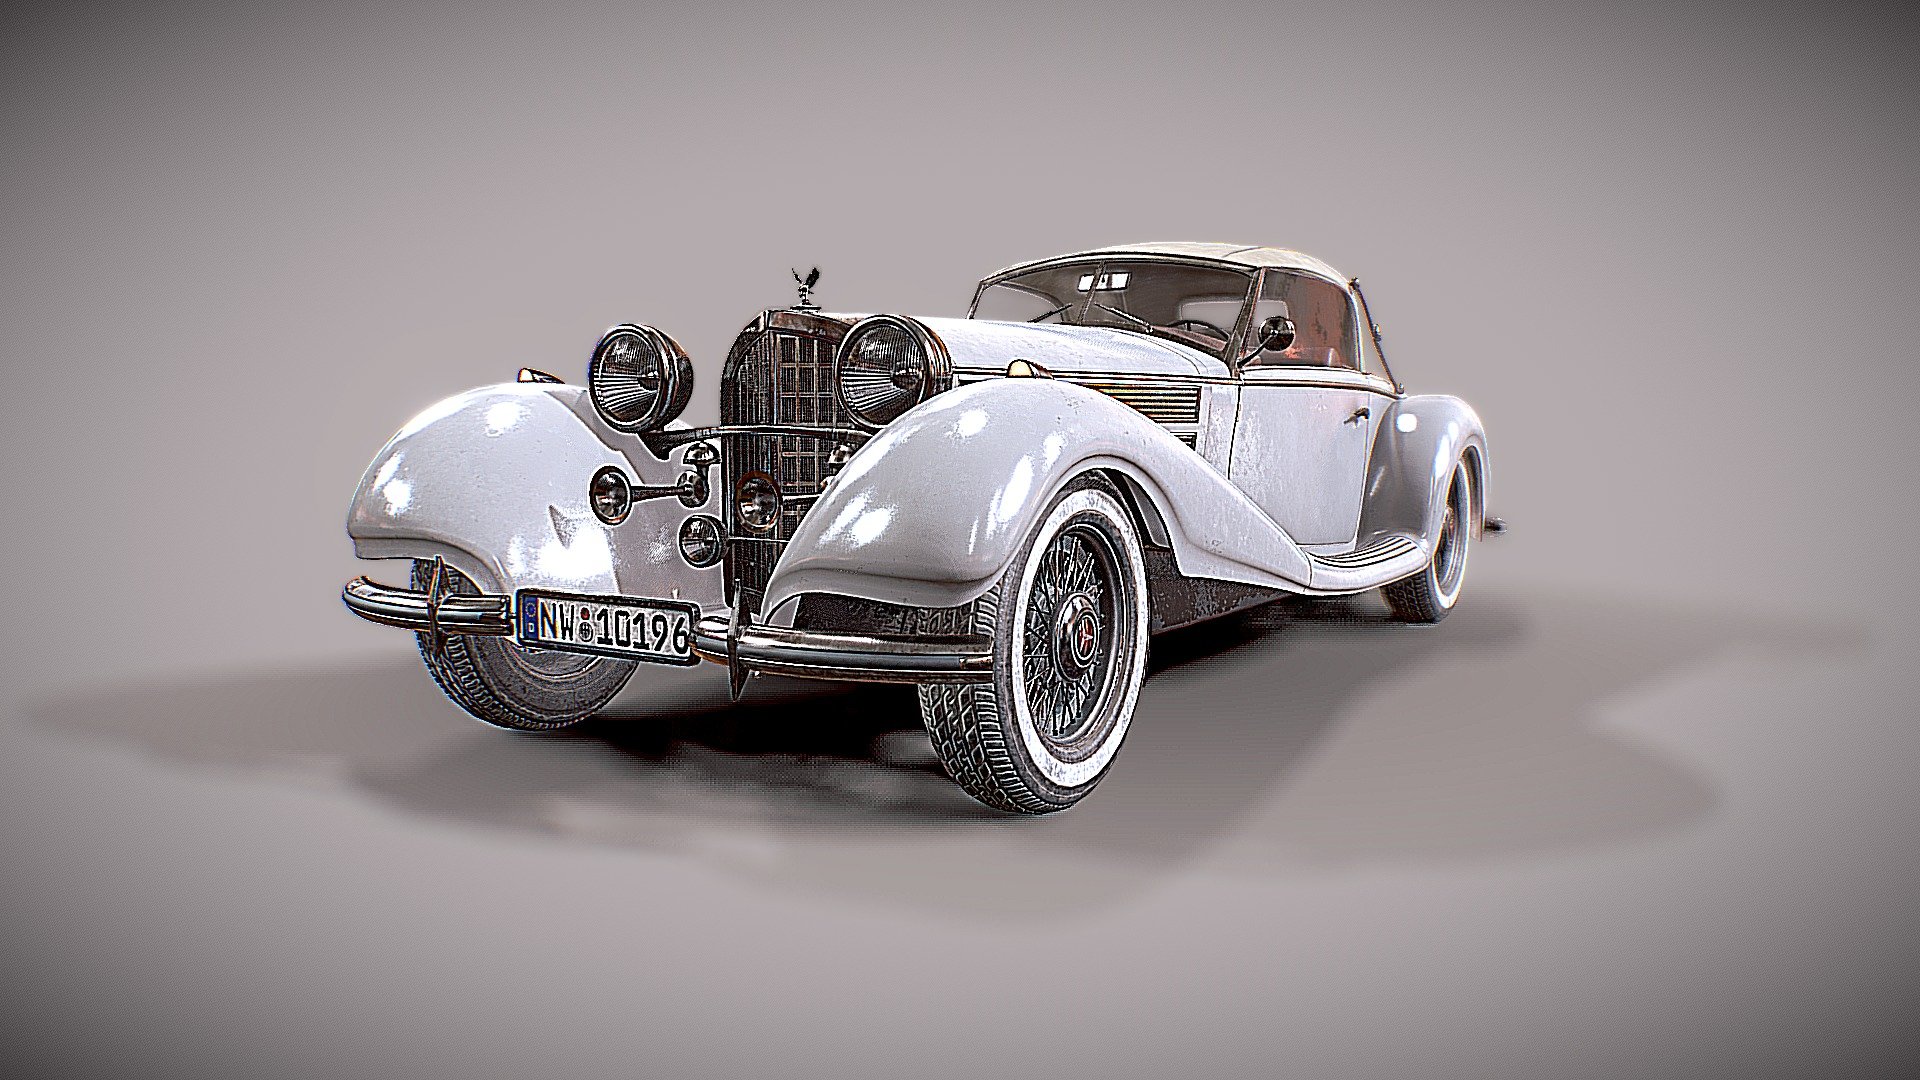 Normal maps have been compressed very poorly on sketchfab, so they cannot be appreciated as they really are.

Quick visualization of the original black car, color variant: White.

Stay tuned for future Artstation renders.

Original for sale (Comes with 3 color variants): https://sketchfab.com/3d-models/gameready-1930s-vintage-cabriolet-vehicle-1811d45ab398489fa9eaa90fc0884344

3 texture sets 3d model